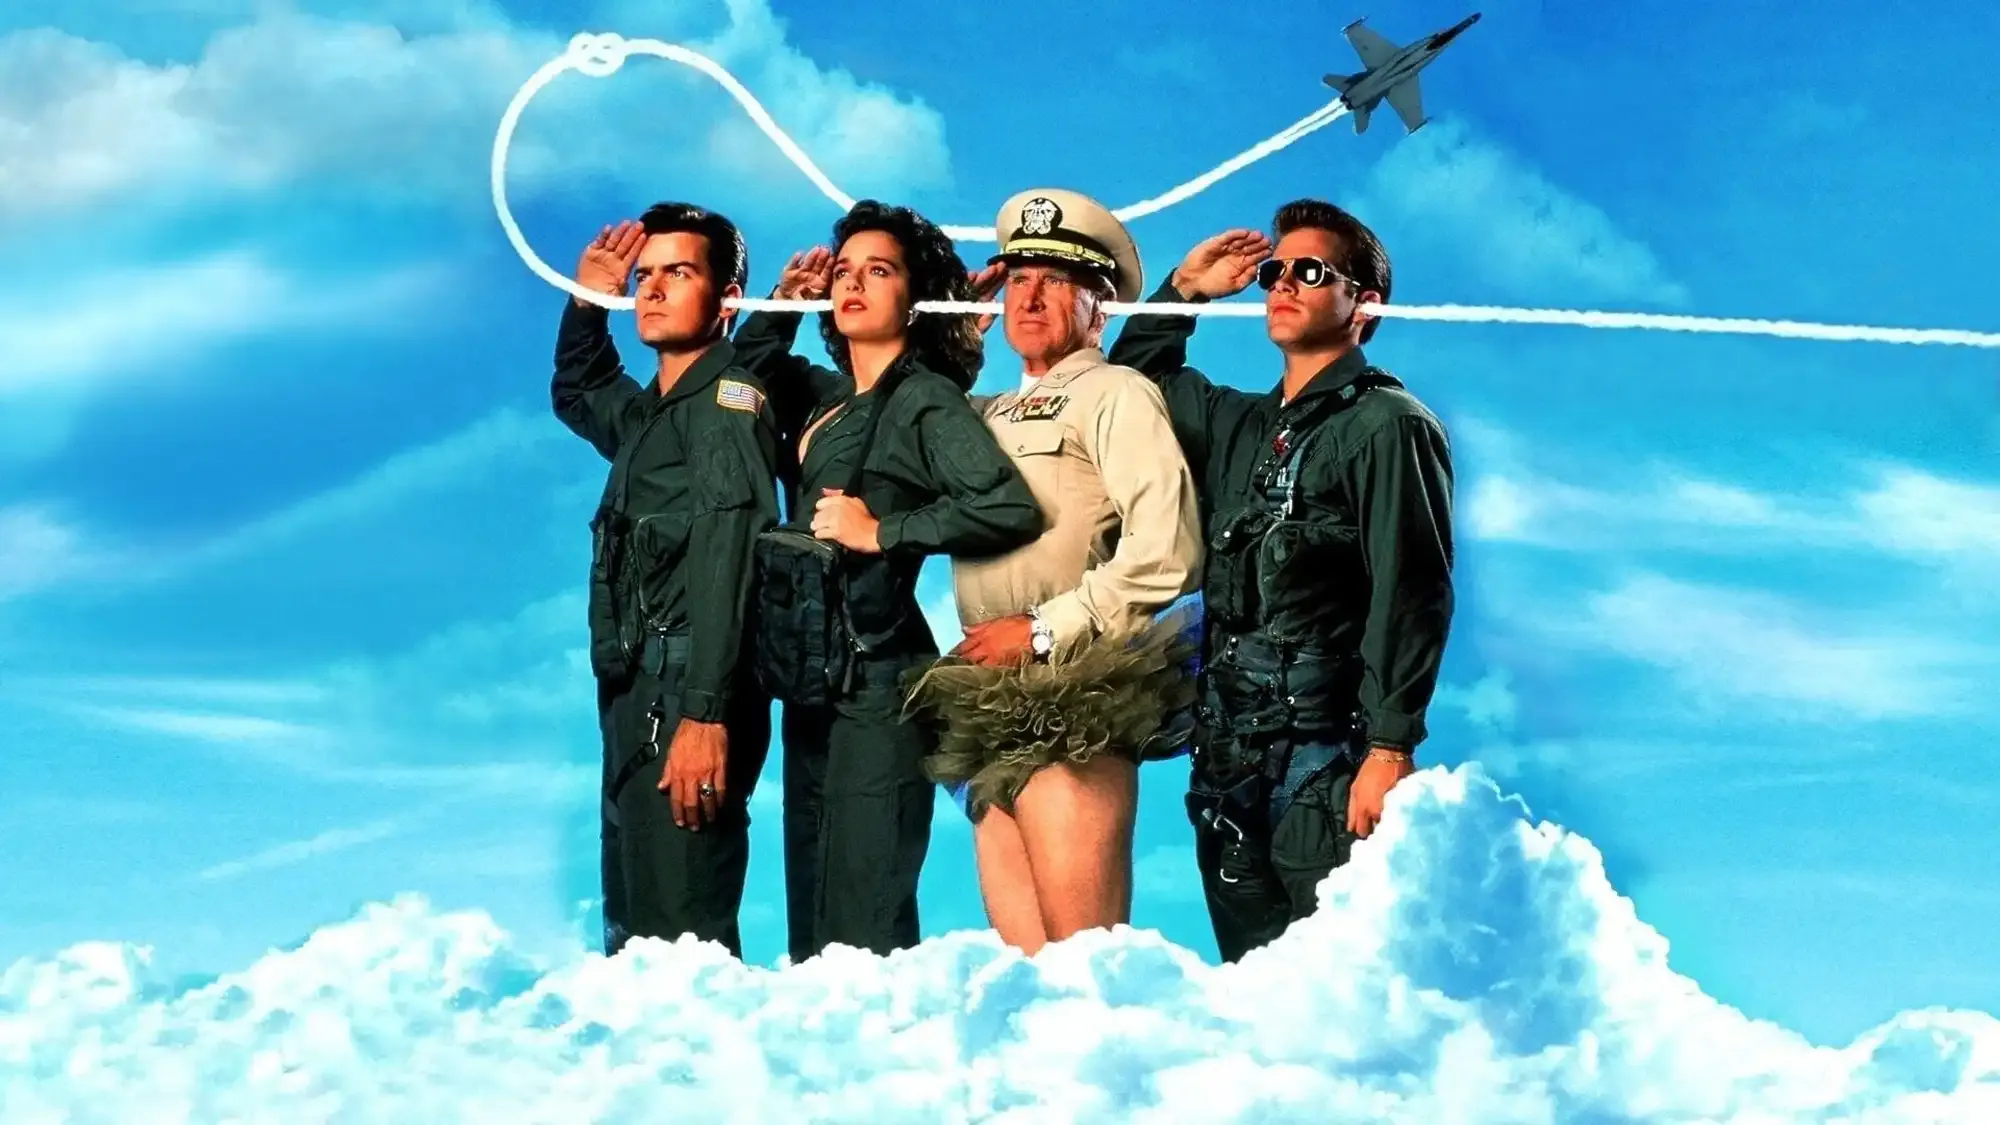 Hot Shots! movie review